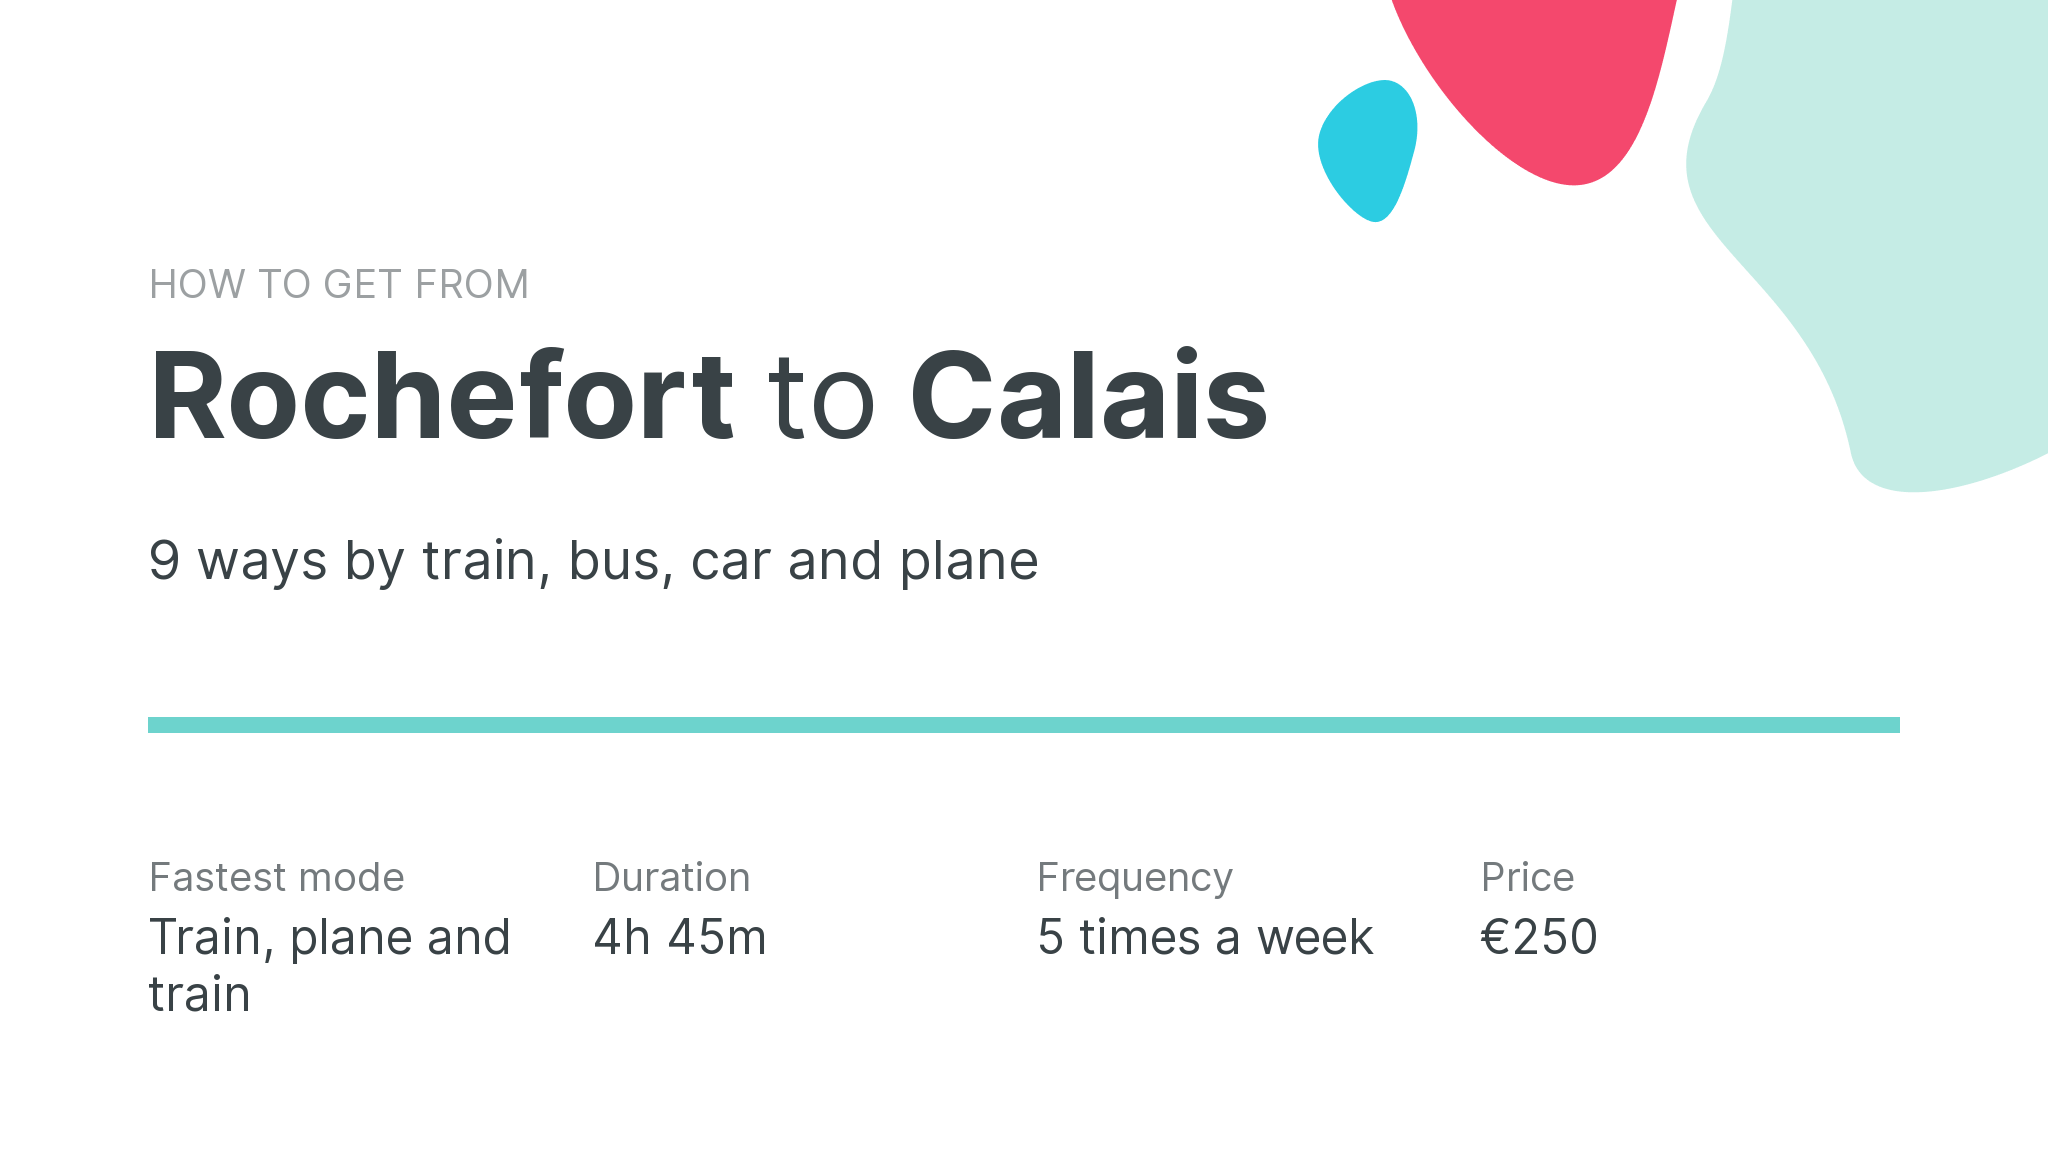 How do I get from Rochefort to Calais